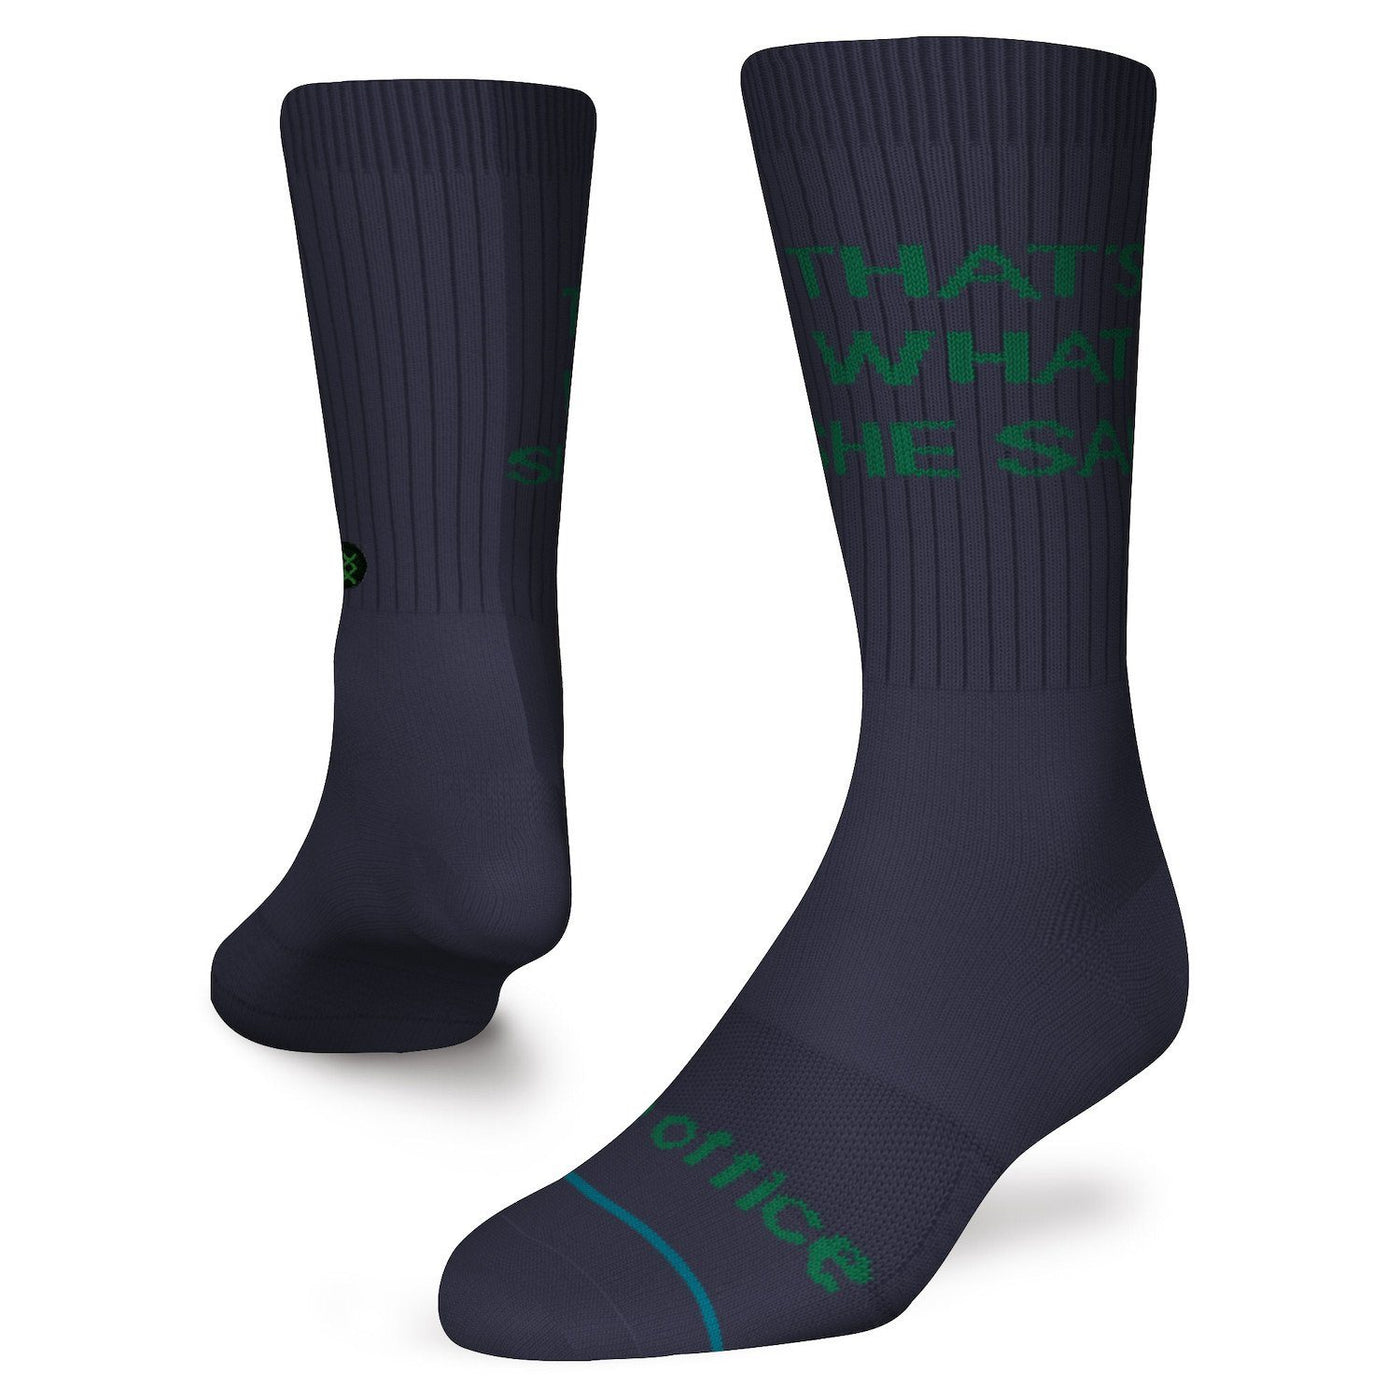 Stance - The Office "That's What She Said" Crew Socks | Men's - Knock Your Socks Off